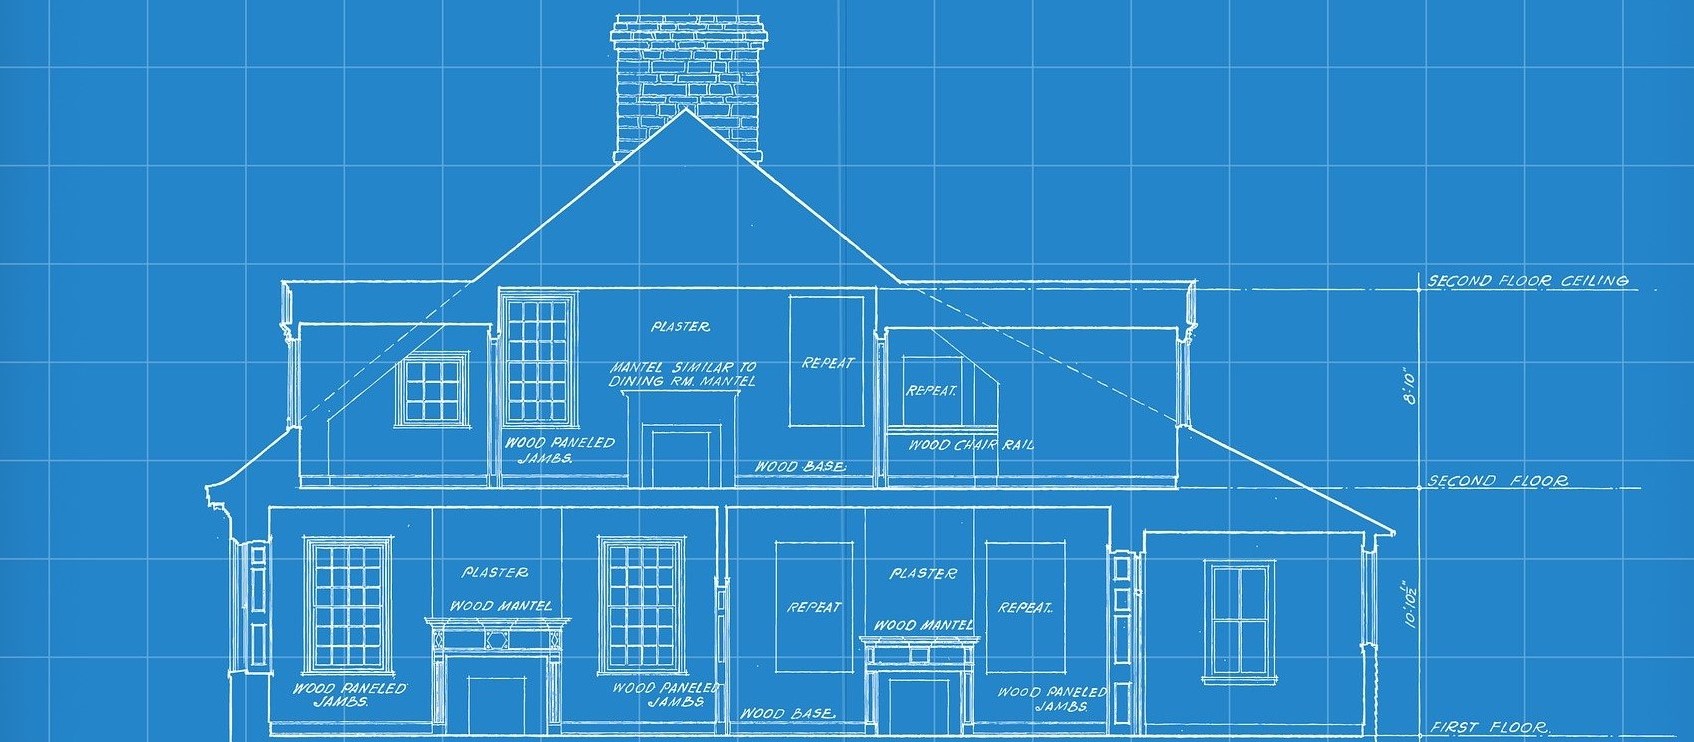 google can see through these blueprints